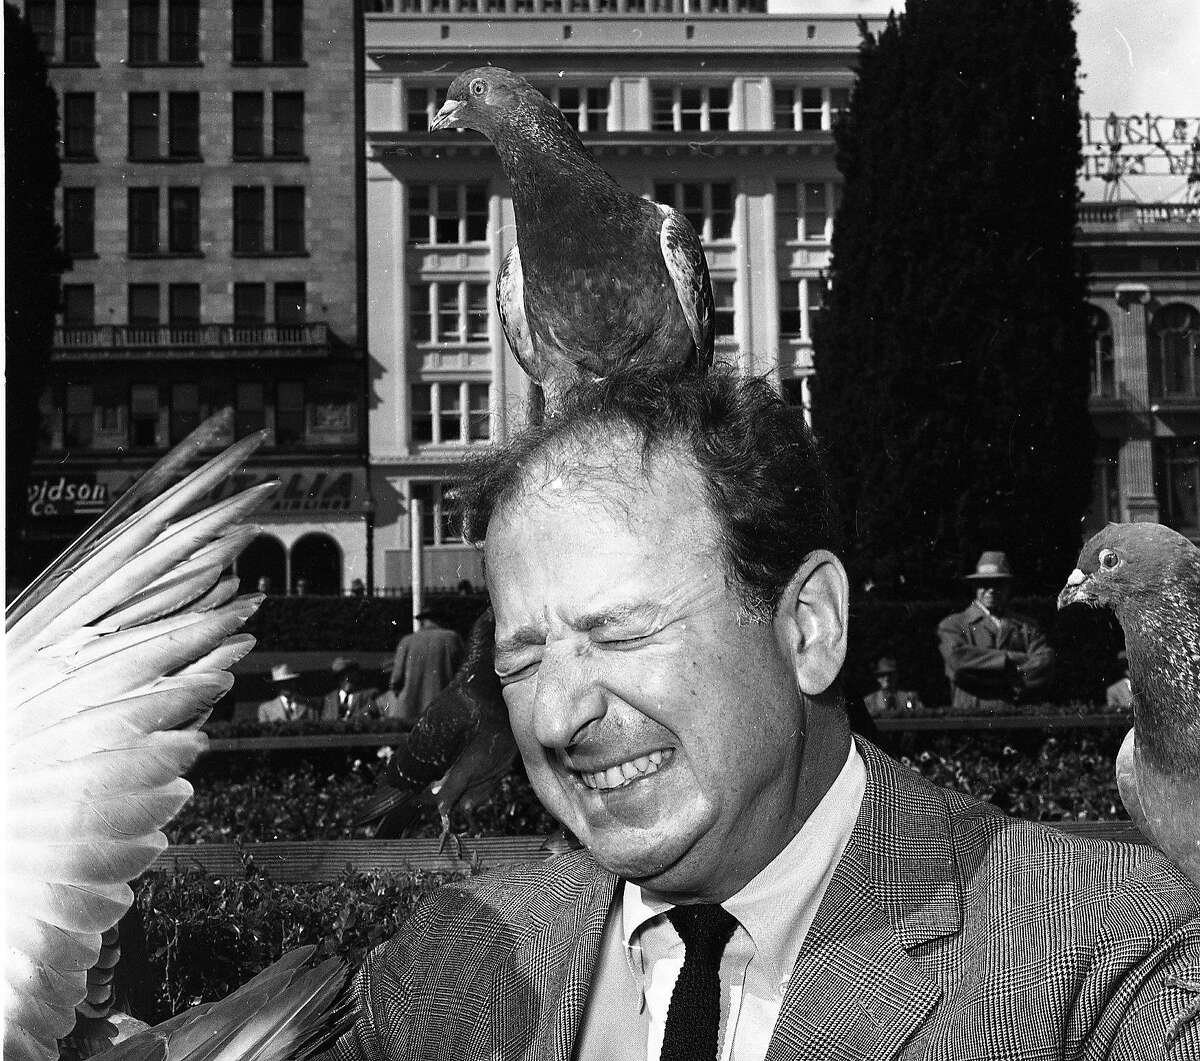 April 1, 1963: Herb Caen winces as a pigeon lands on his head, during a promotion for "The Birds" with Alfred Hitchcock in Union Square.